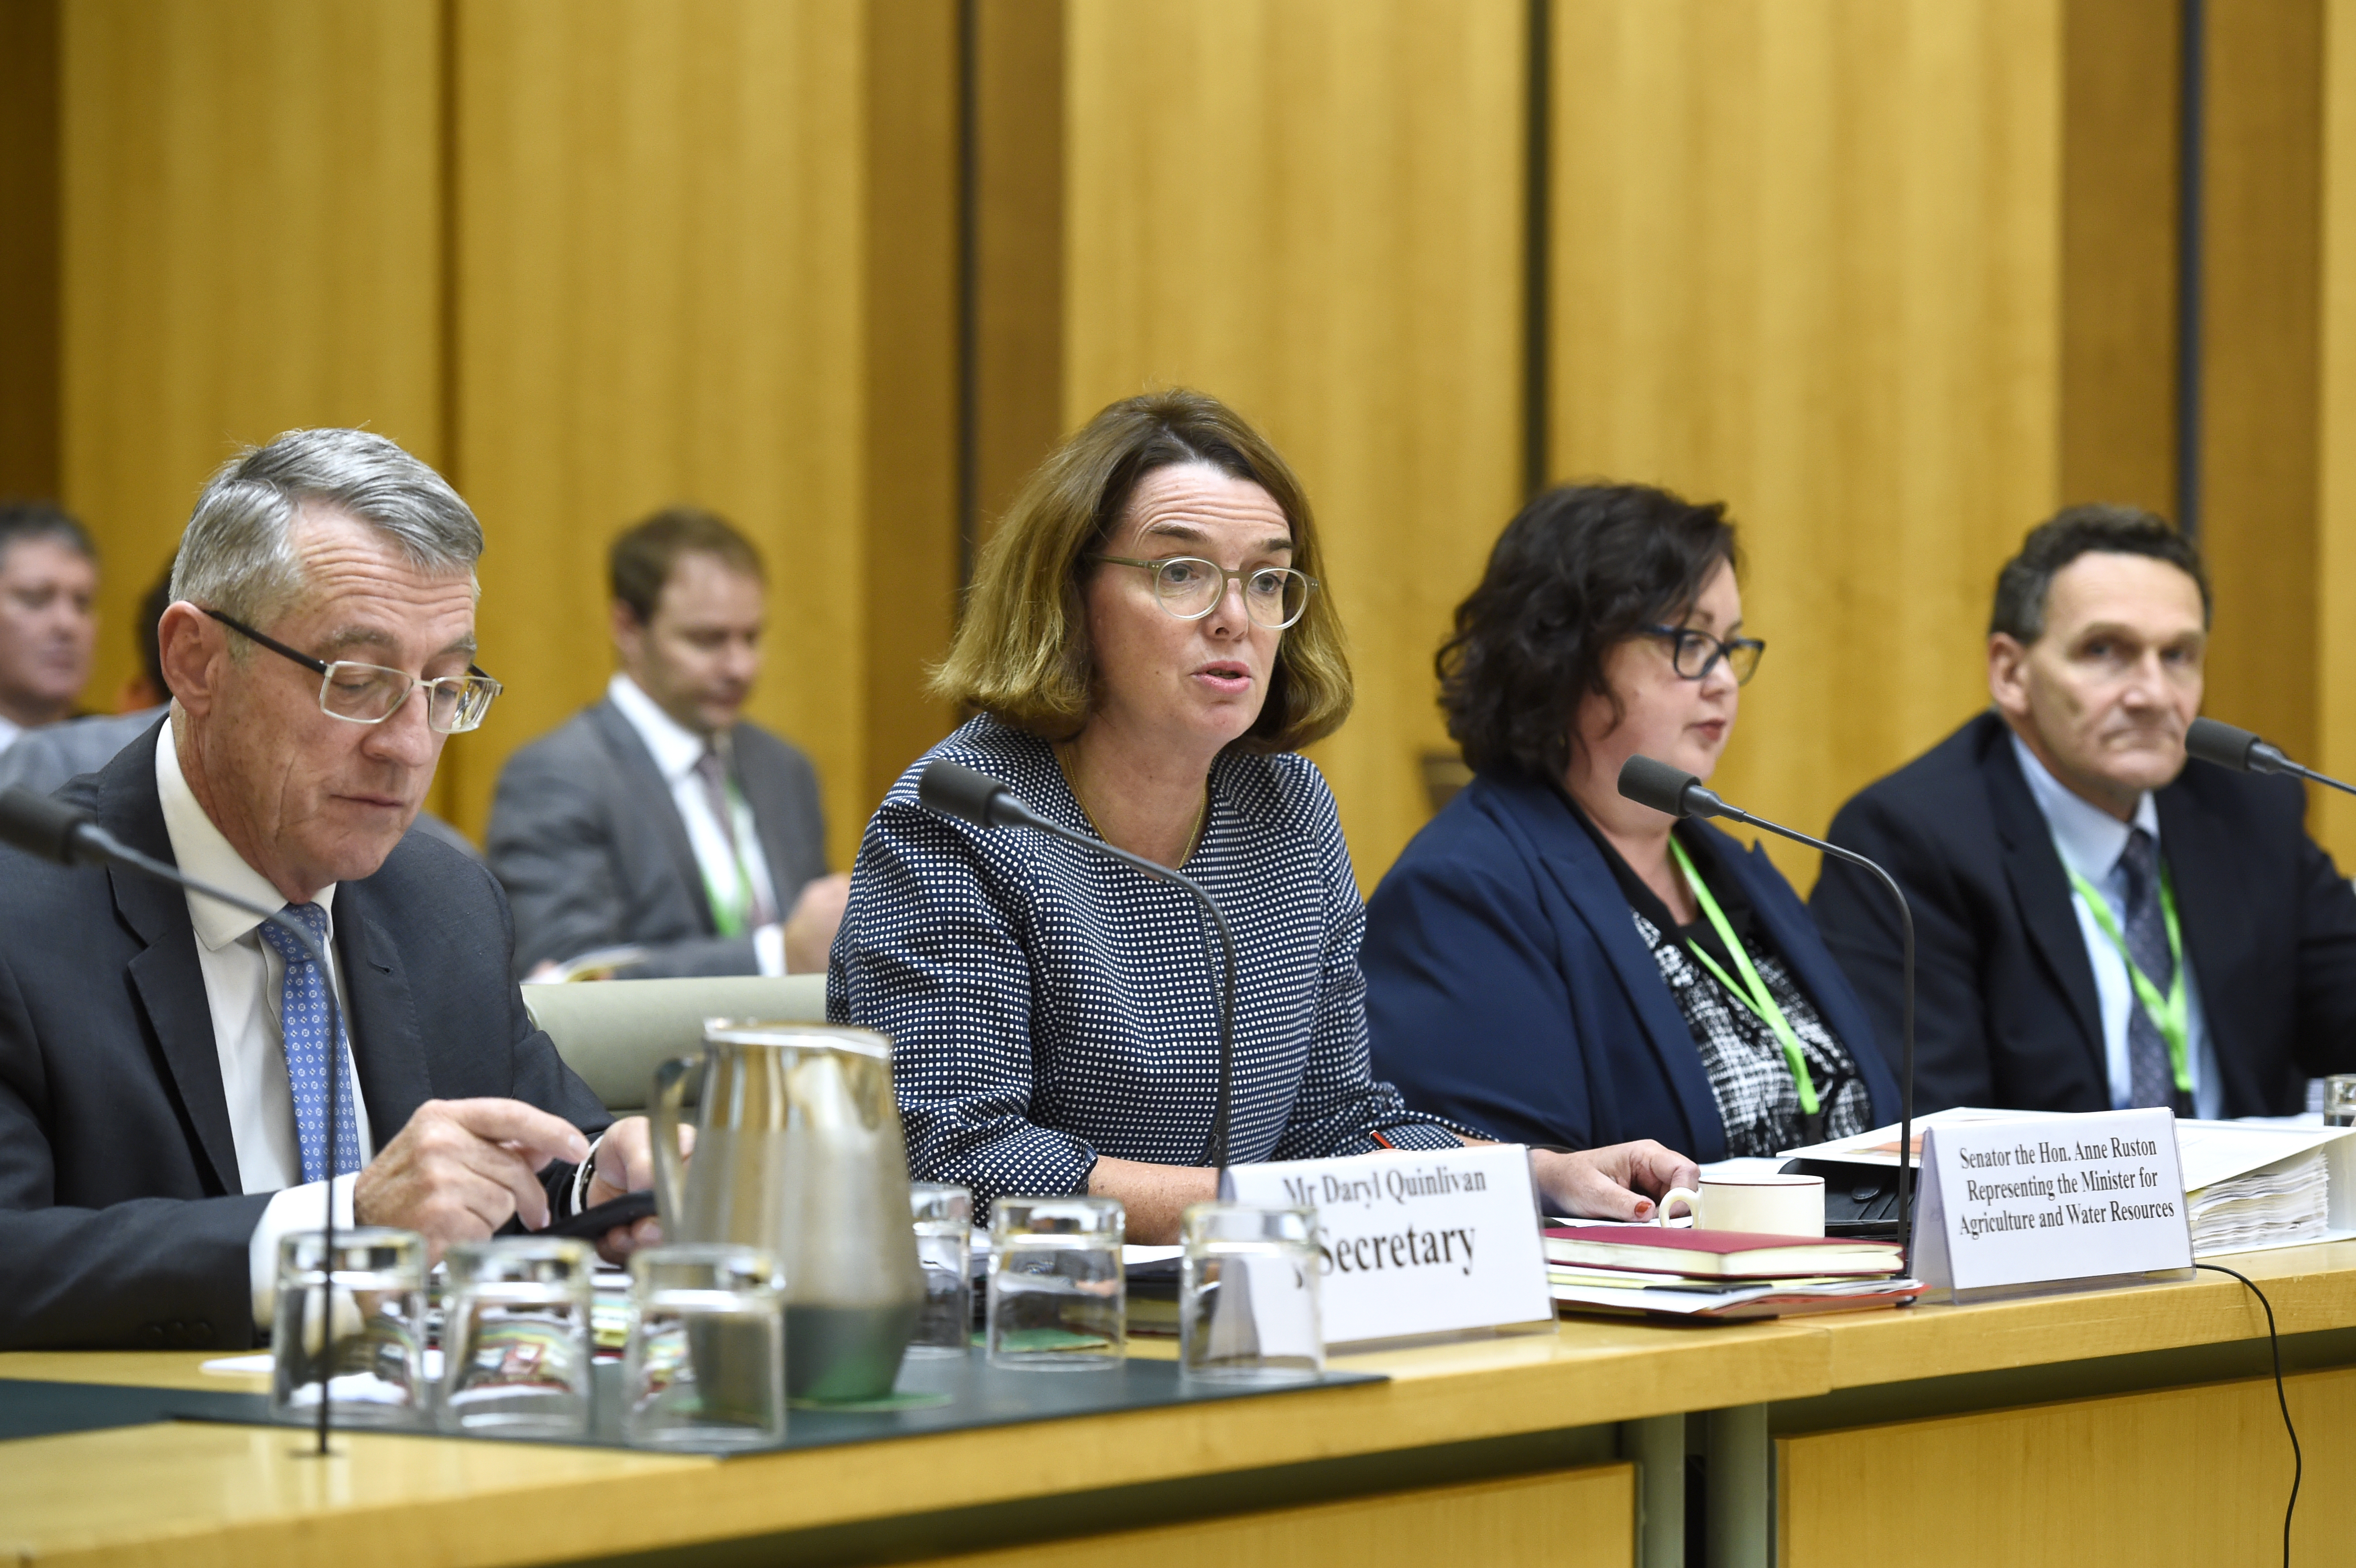 Senator the Hon Anne Ruston, Assistant Minister for Agriculture and Water Resources and officers of the Department of Agriculture and Water Resources answering questions during the budget estimates hearing, 24 May 2018. L-R: Daryl Quinlivan [Departmental Secretary], Senator the Hon Anne Ruston, Michelle Lauder [Assistant Secretary] and Ian Thompson [First Assistant Secretary]. DPS Auspic.